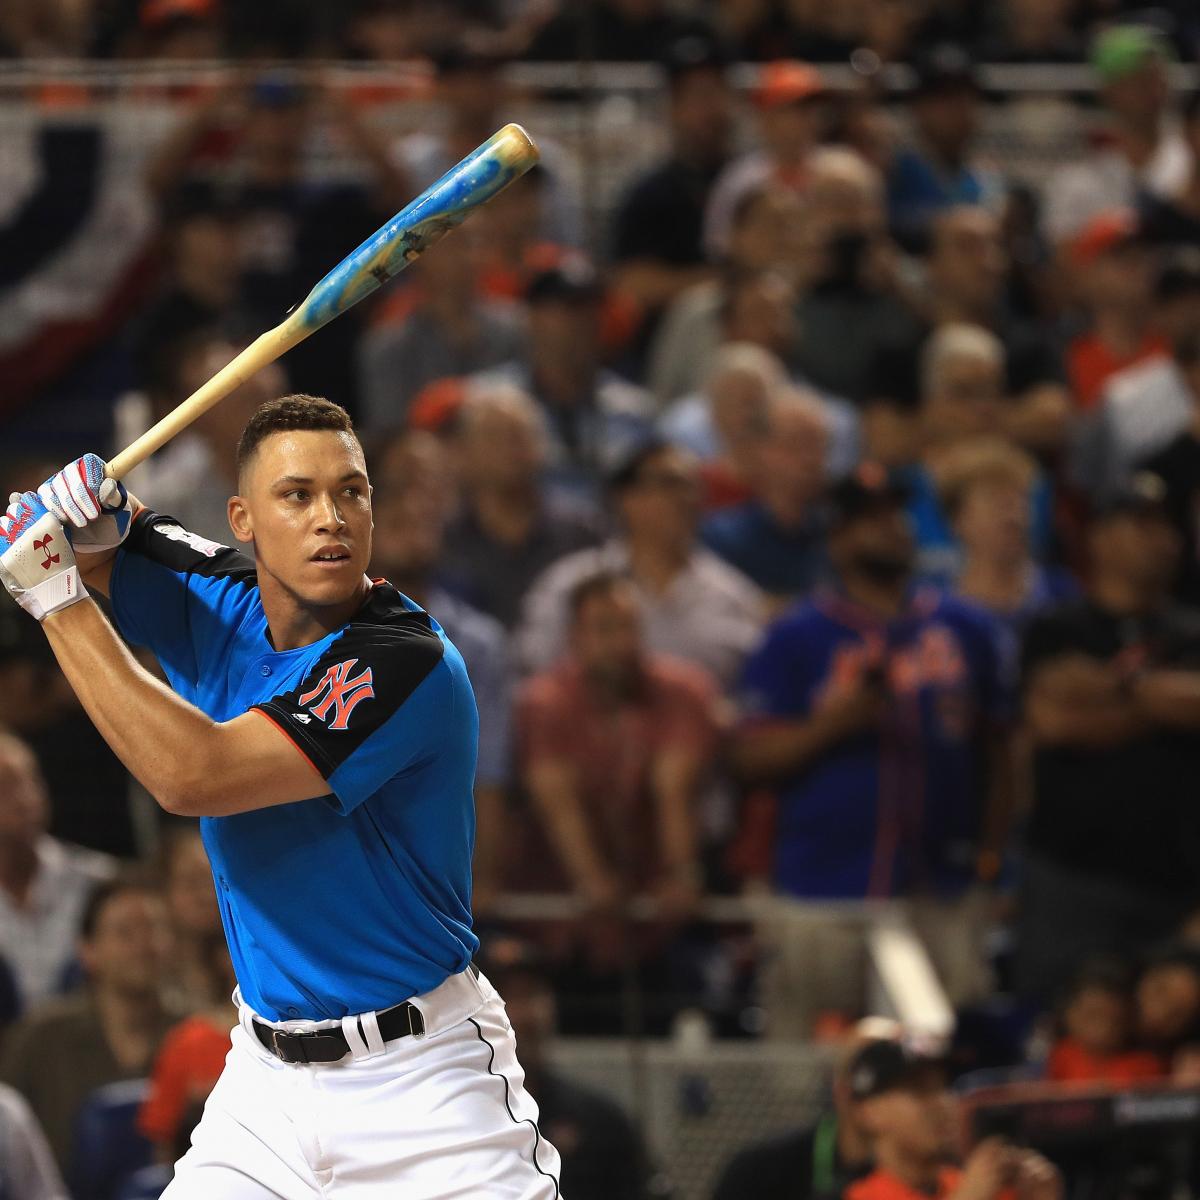 MLB Home Run Derby 2017 results: Aaron Judge puts on a show to win